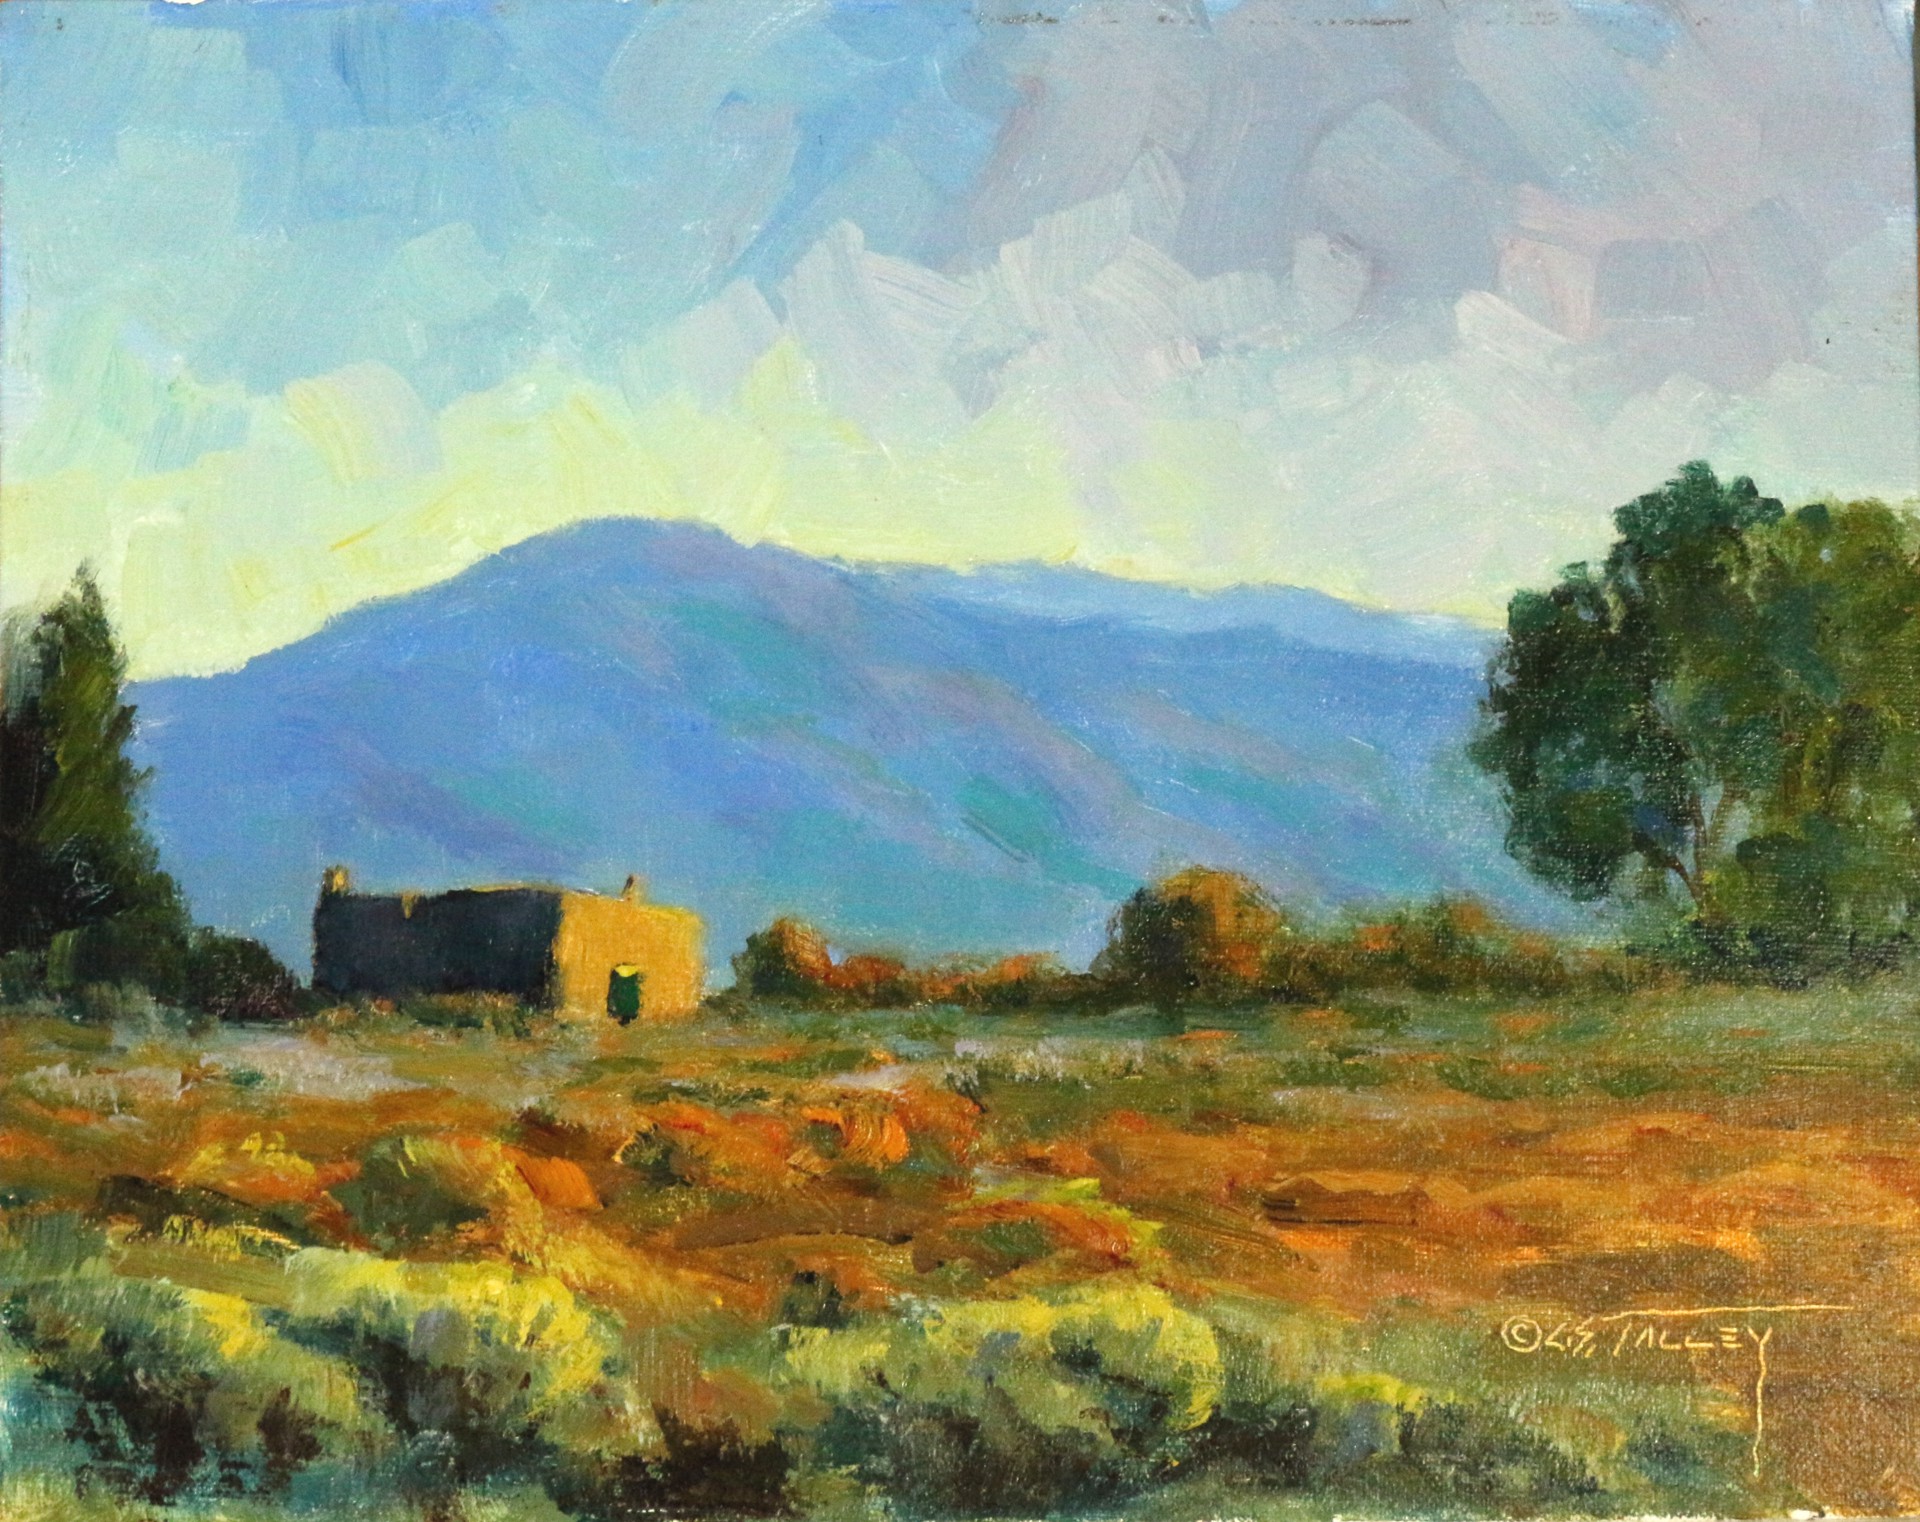 New Mexico Morning by C. S. Talley